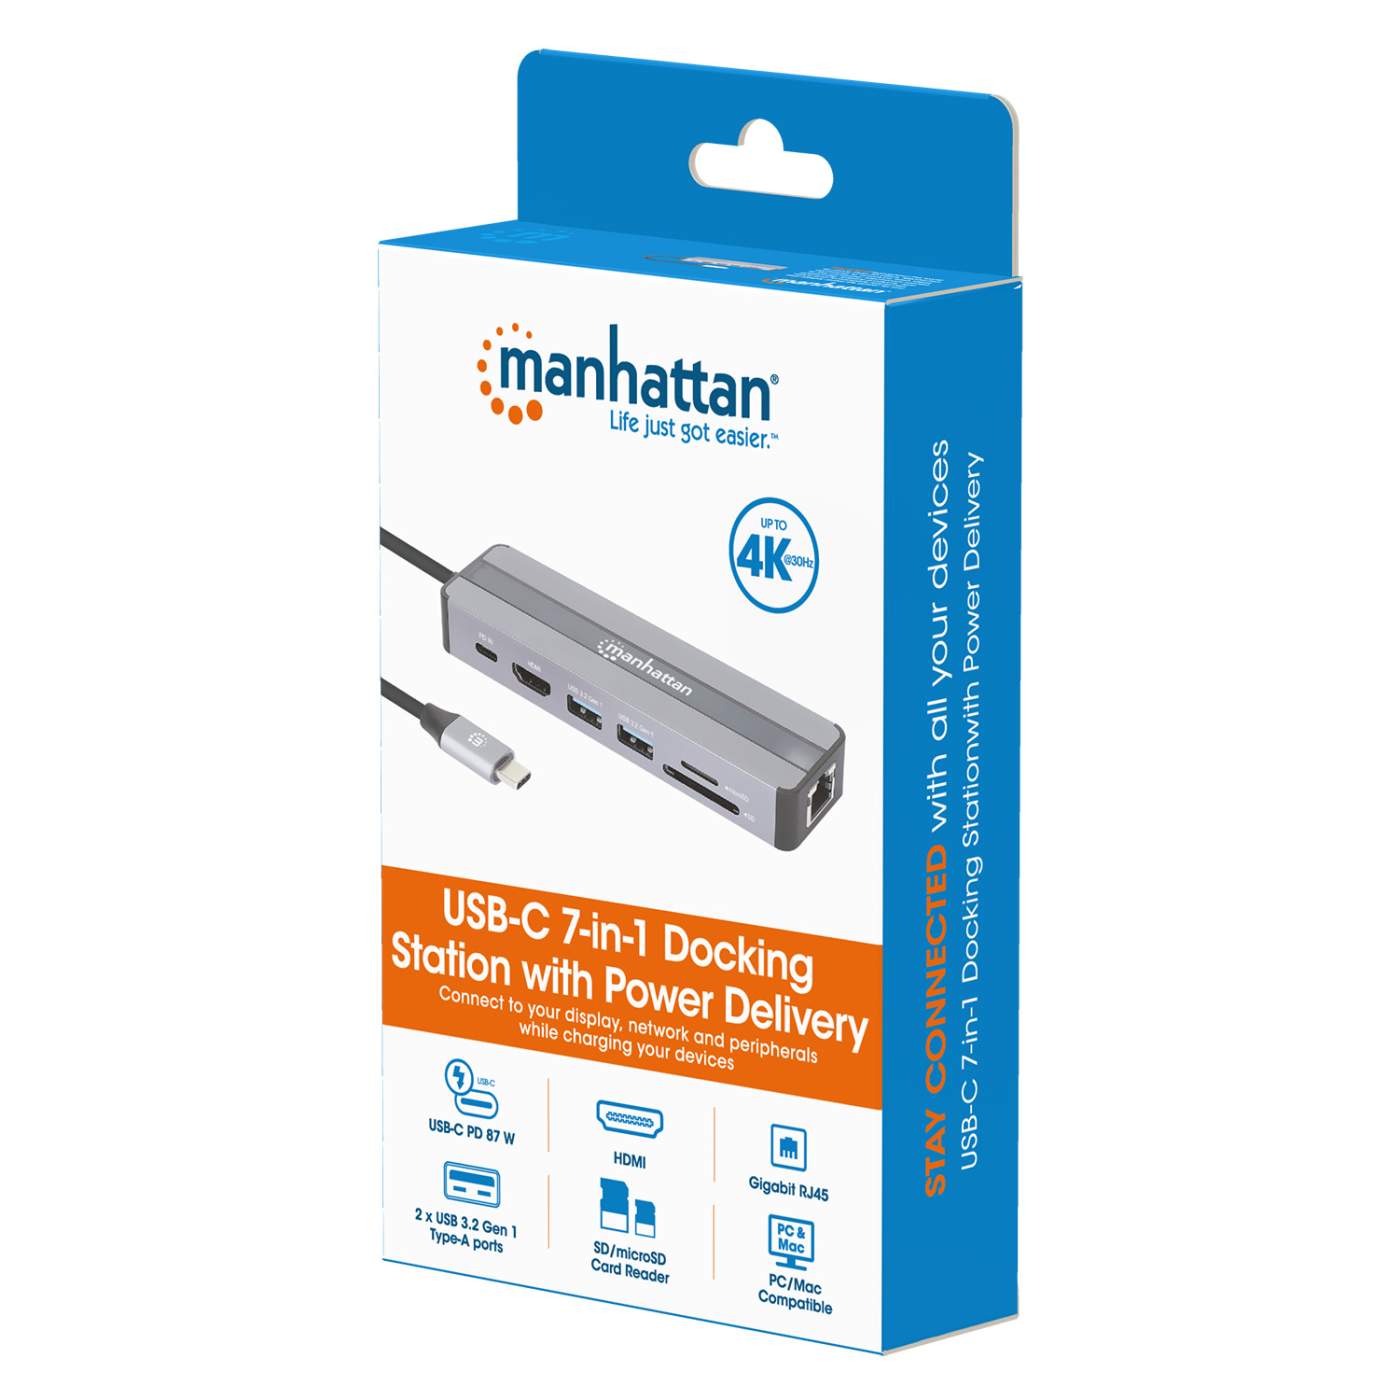 USB-C 7-in-1 Docking Station with Power Delivery Packaging Image 2